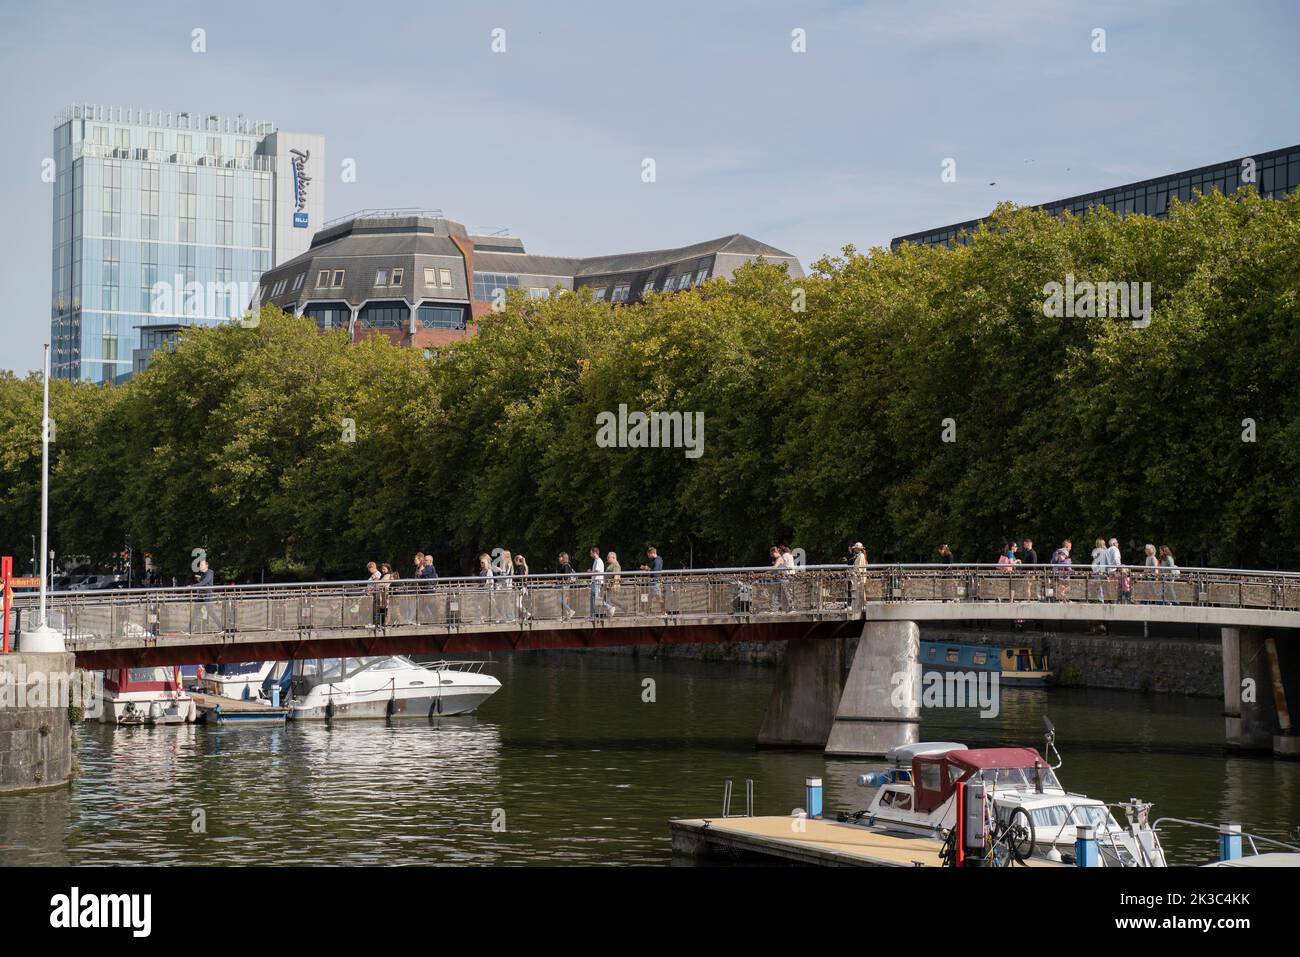 General view of Pero's Bridge over the floating harbour in Bristol, England, UK. Stock Photo